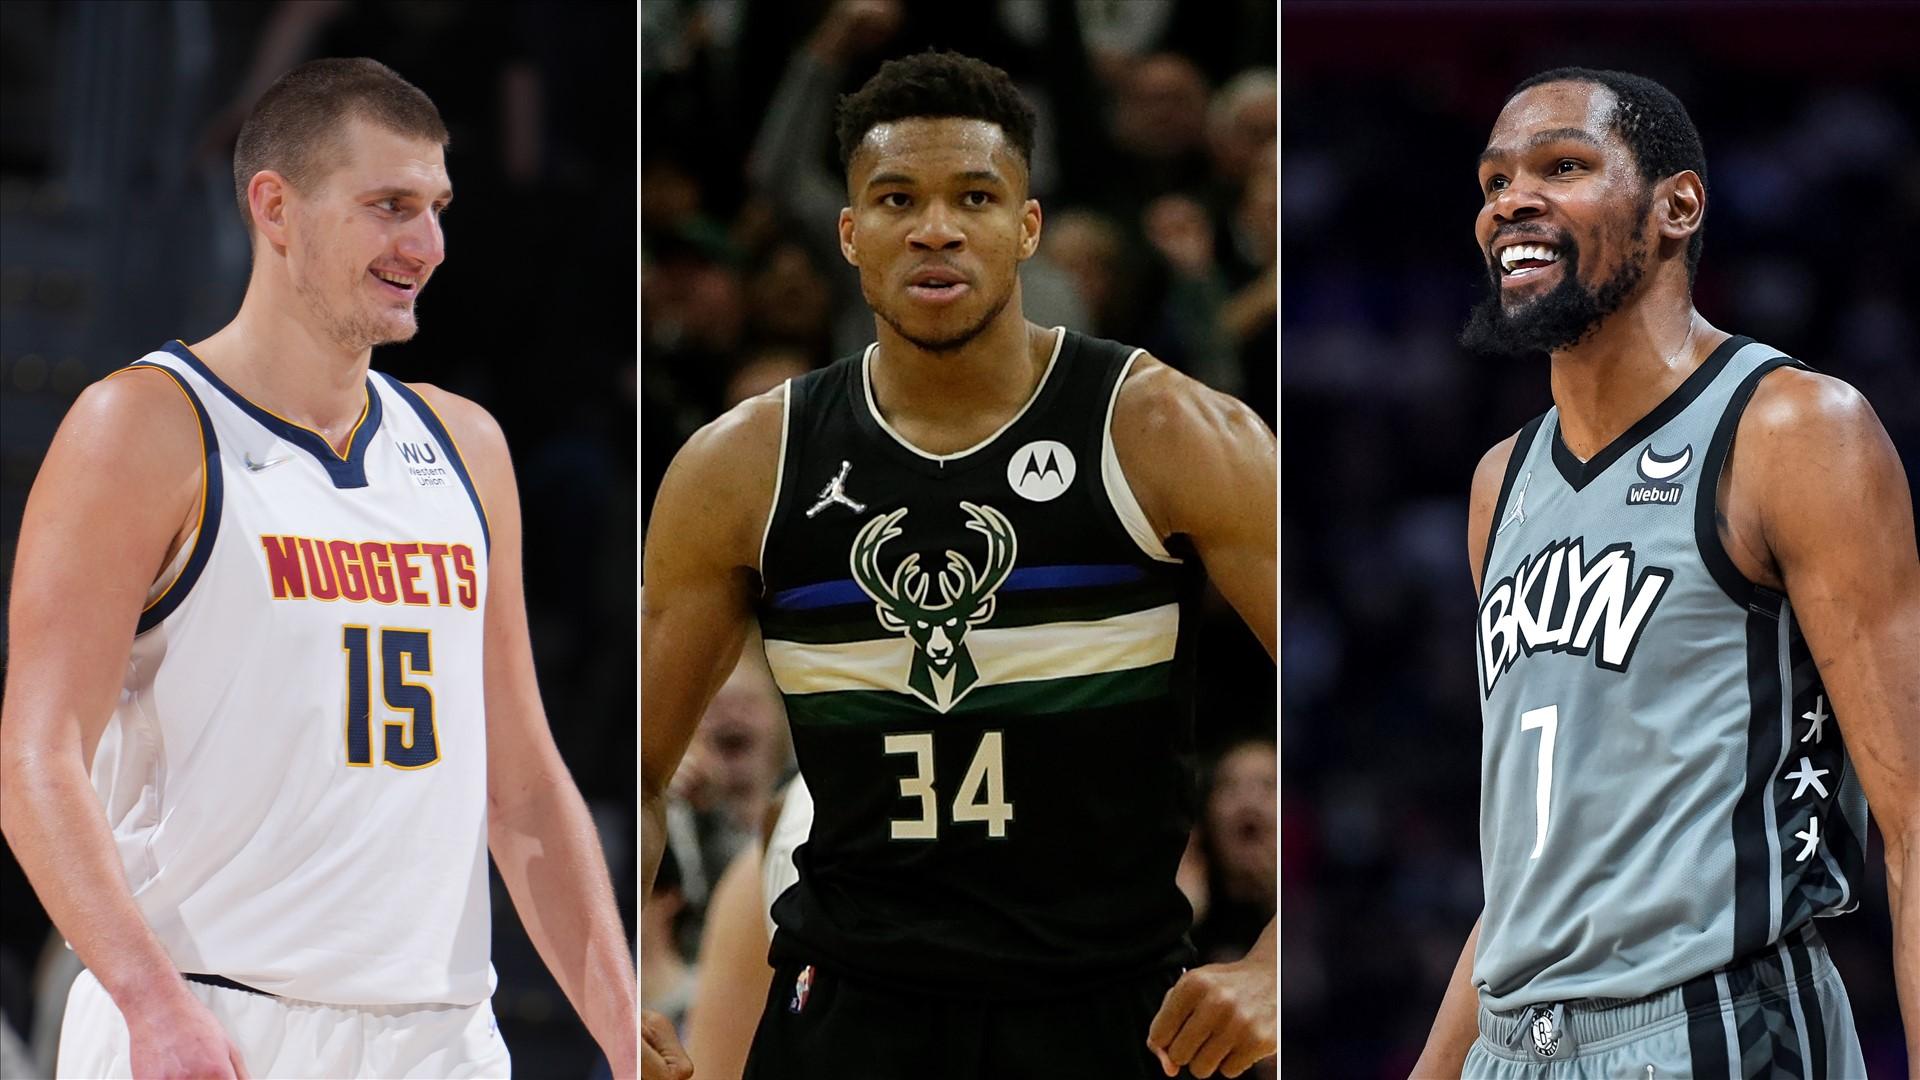 Ranking The Top NBA Players Right Now